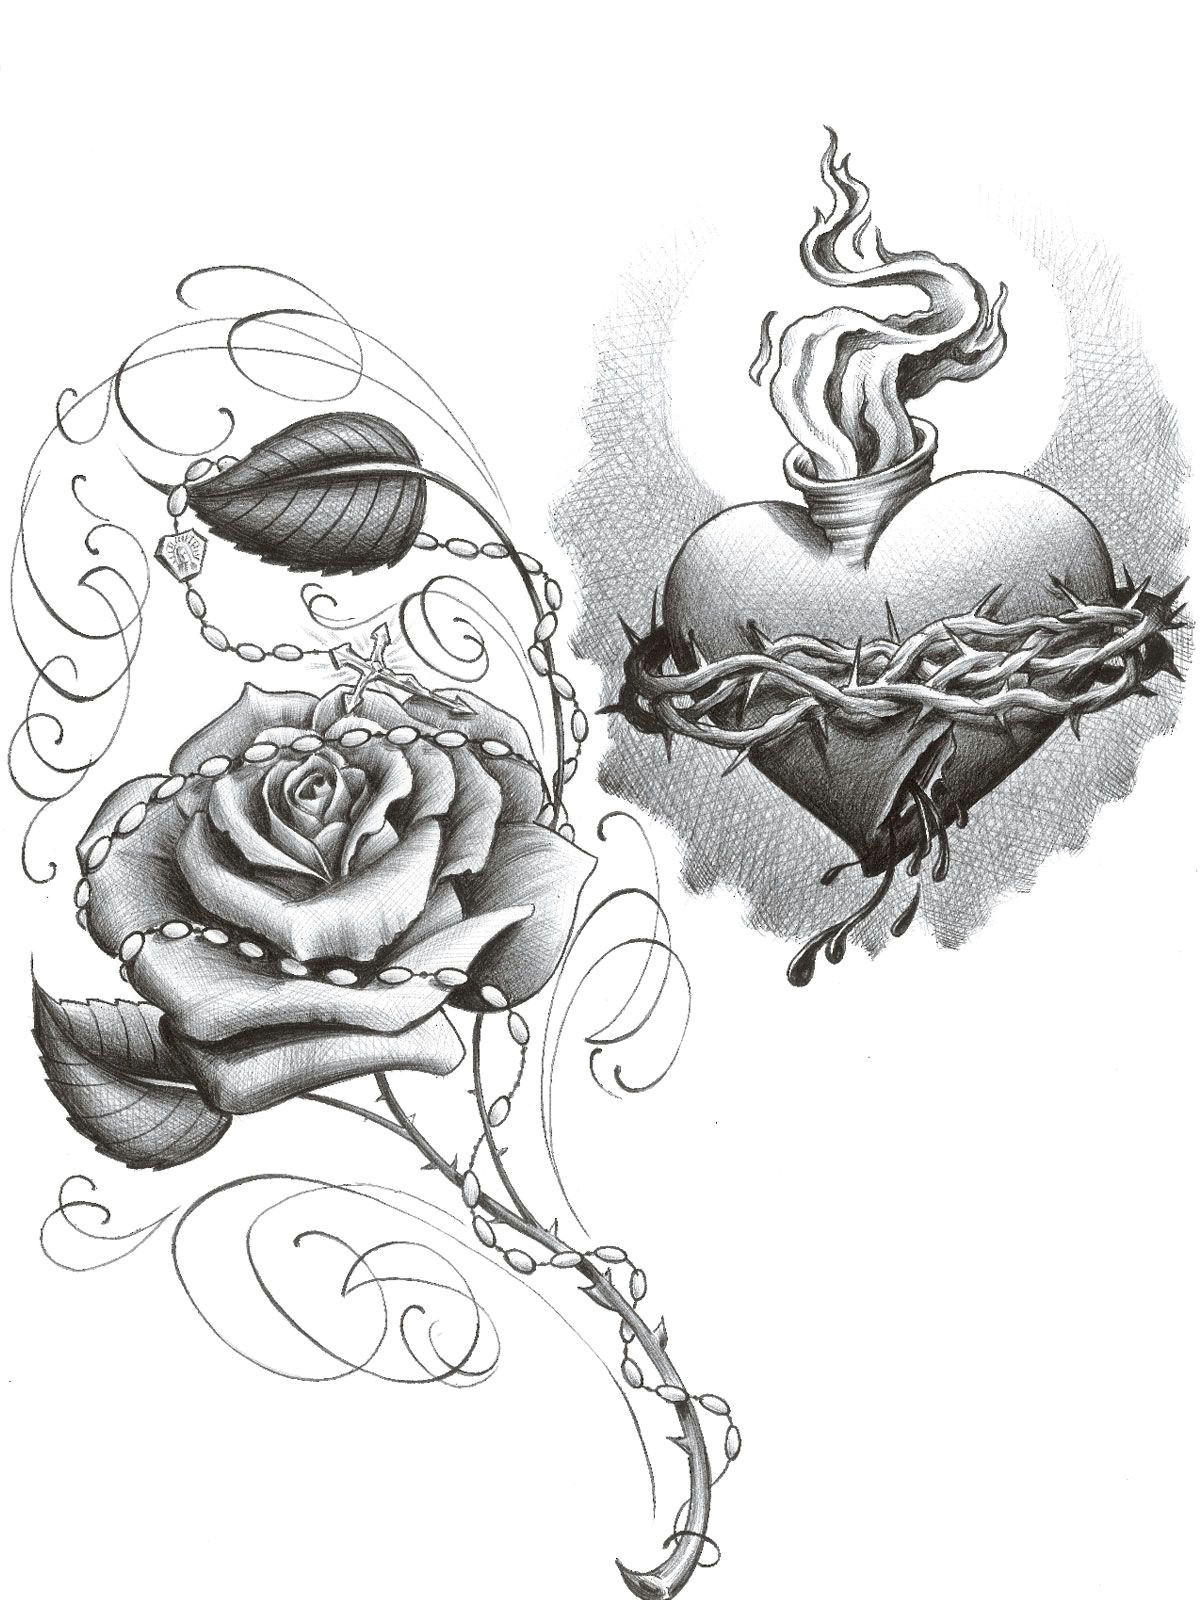 Drawing A Rose Love Lowrider Drawings Pictures Lowrider Art Image Lowrider Art